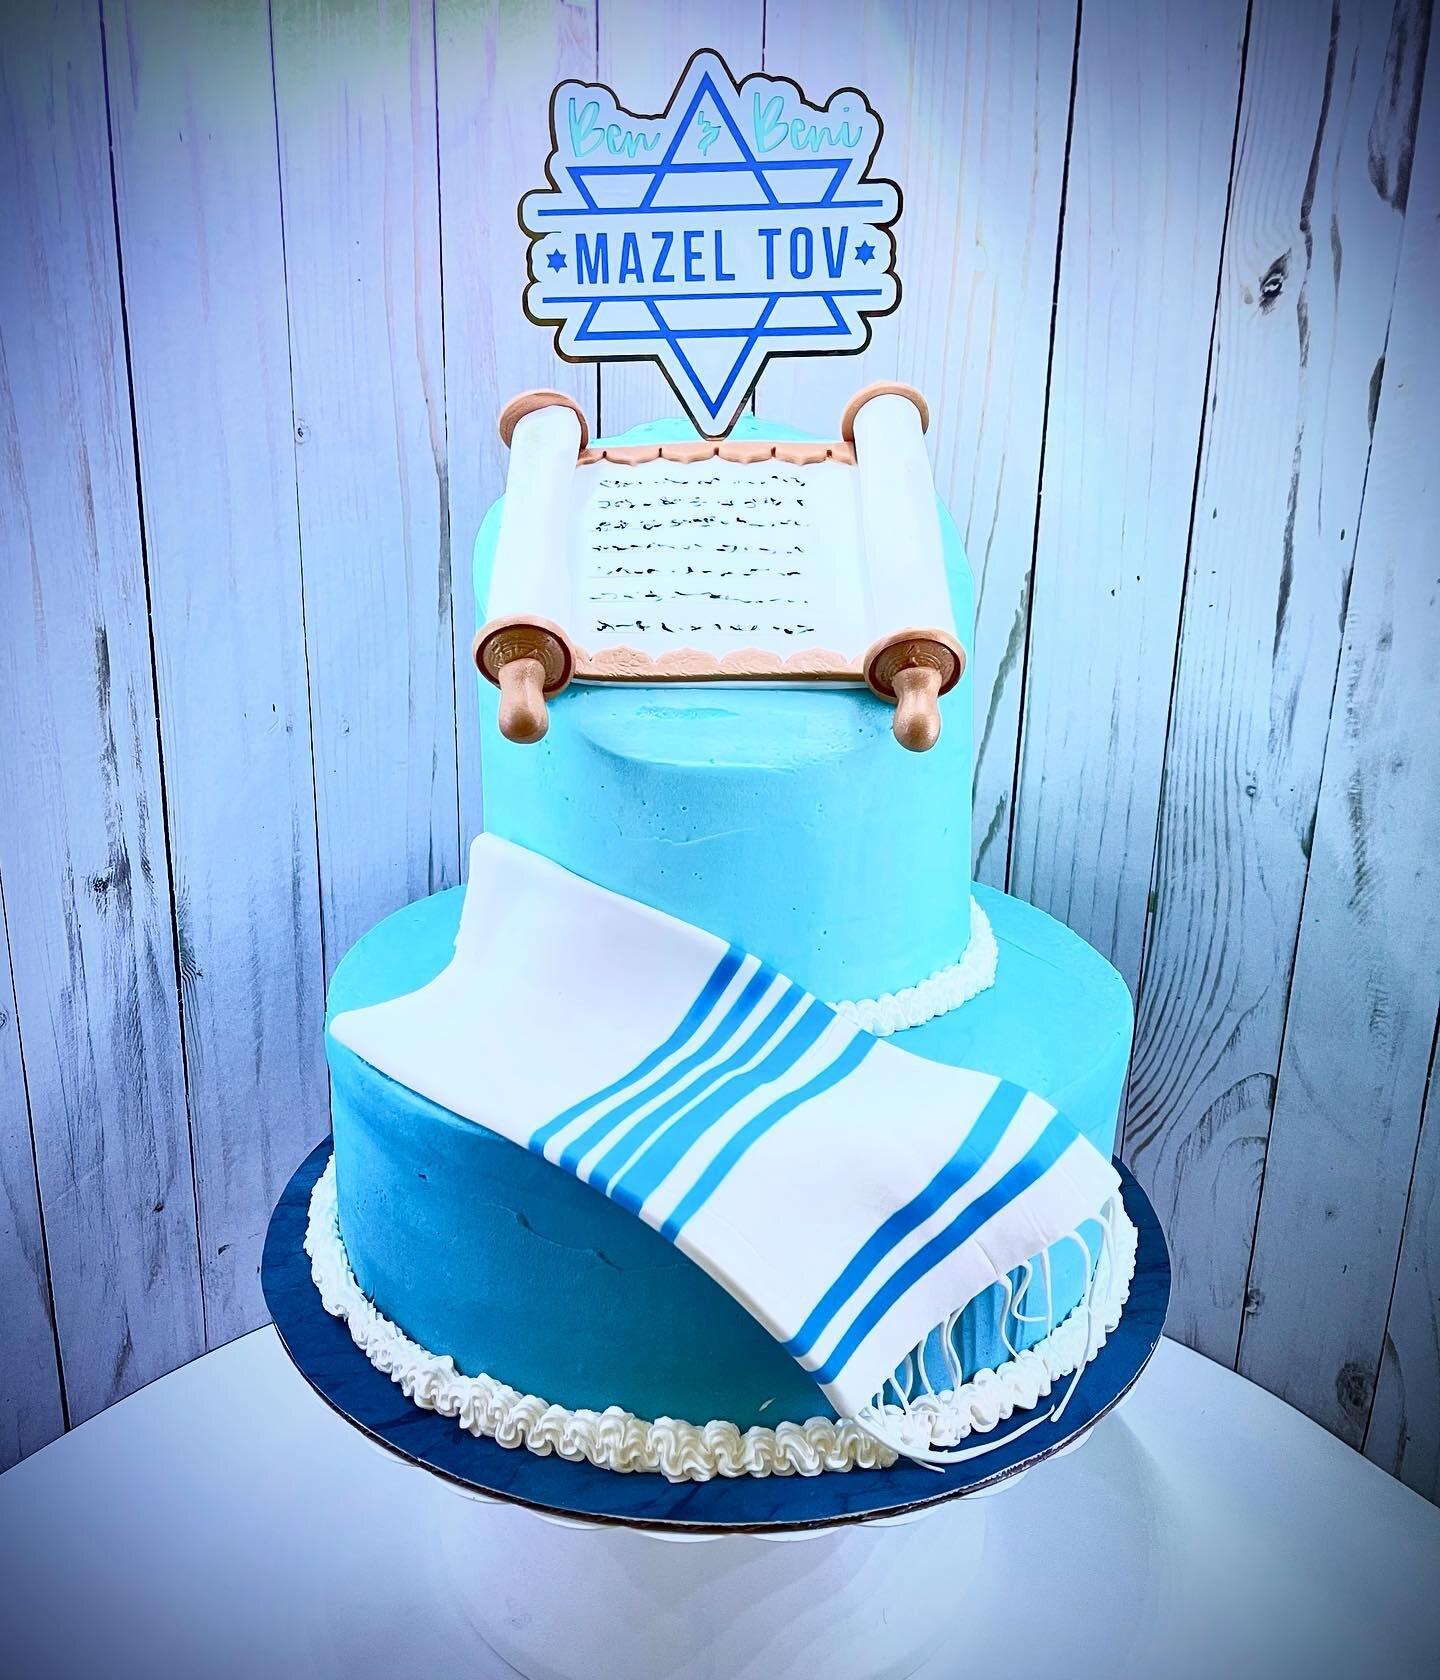 🕍 The Bar Mitzvah Cake 🕍
⠀⠀⠀⠀⠀⠀⠀⠀⠀
Mazel tov Ben &amp; Beni on your Bar Mitzvah!
⠀⠀⠀⠀⠀⠀⠀⠀⠀
| Chocolate layer cake with whipped chocolate  buttercream |
⠀⠀⠀⠀⠀⠀⠀⠀⠀
Custom cake topper created by me, with a little help from my @officialcricut
⠀⠀⠀⠀⠀⠀⠀⠀⠀